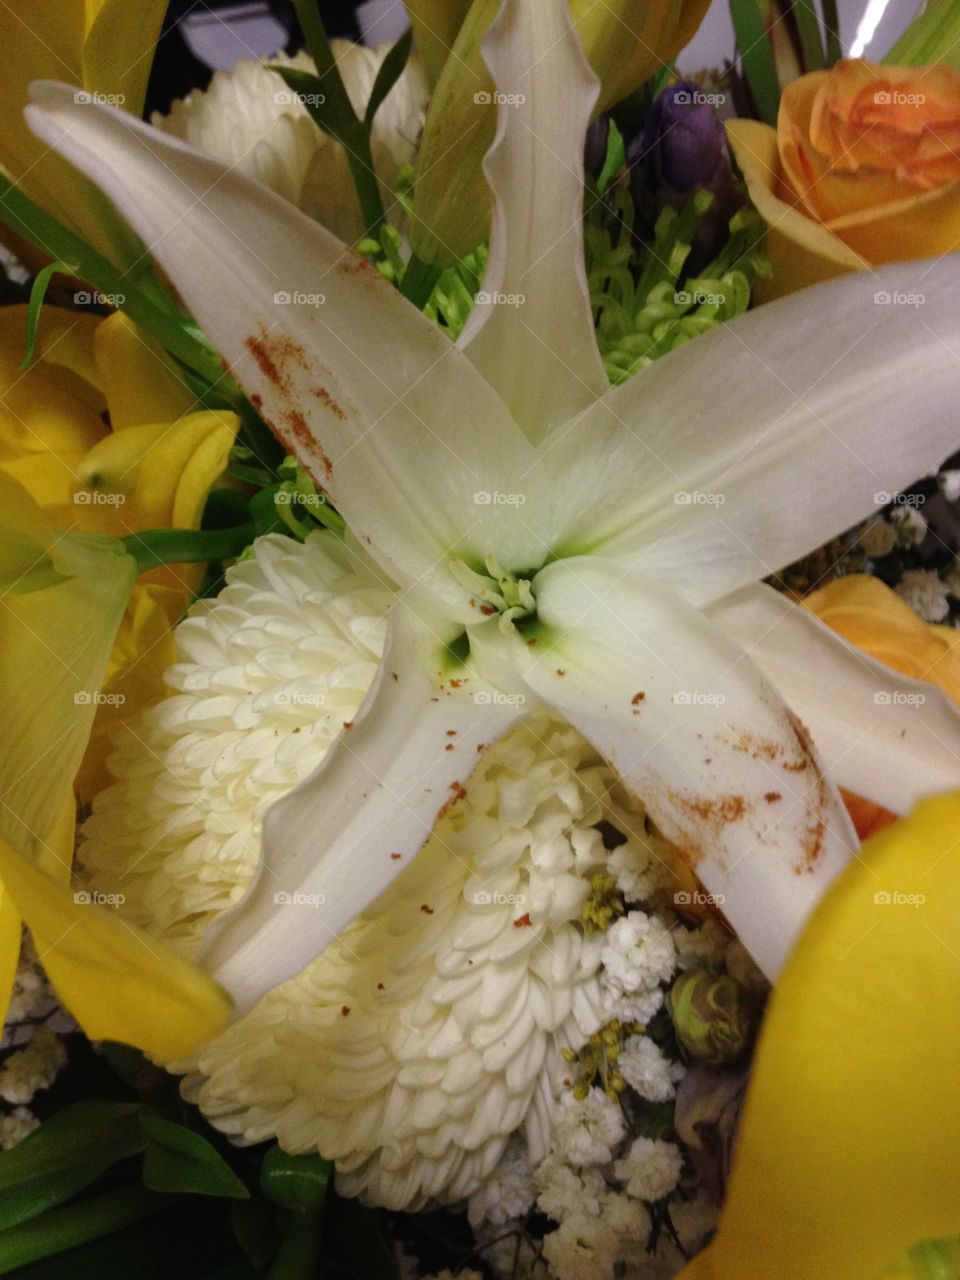 White lily bouquet 